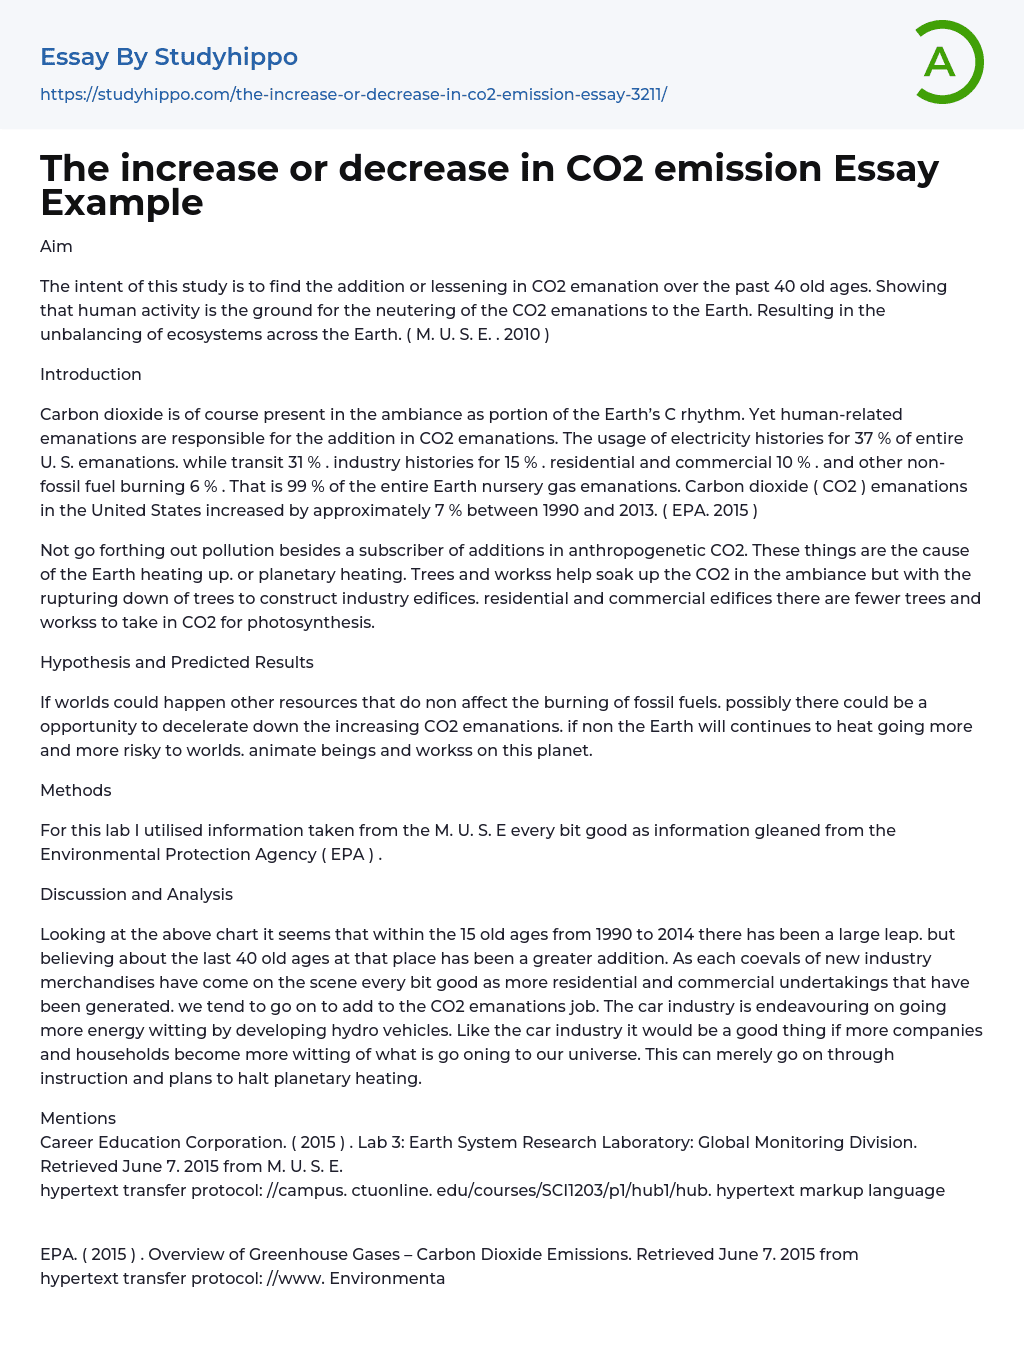 The increase or decrease in CO2 emission Essay Example